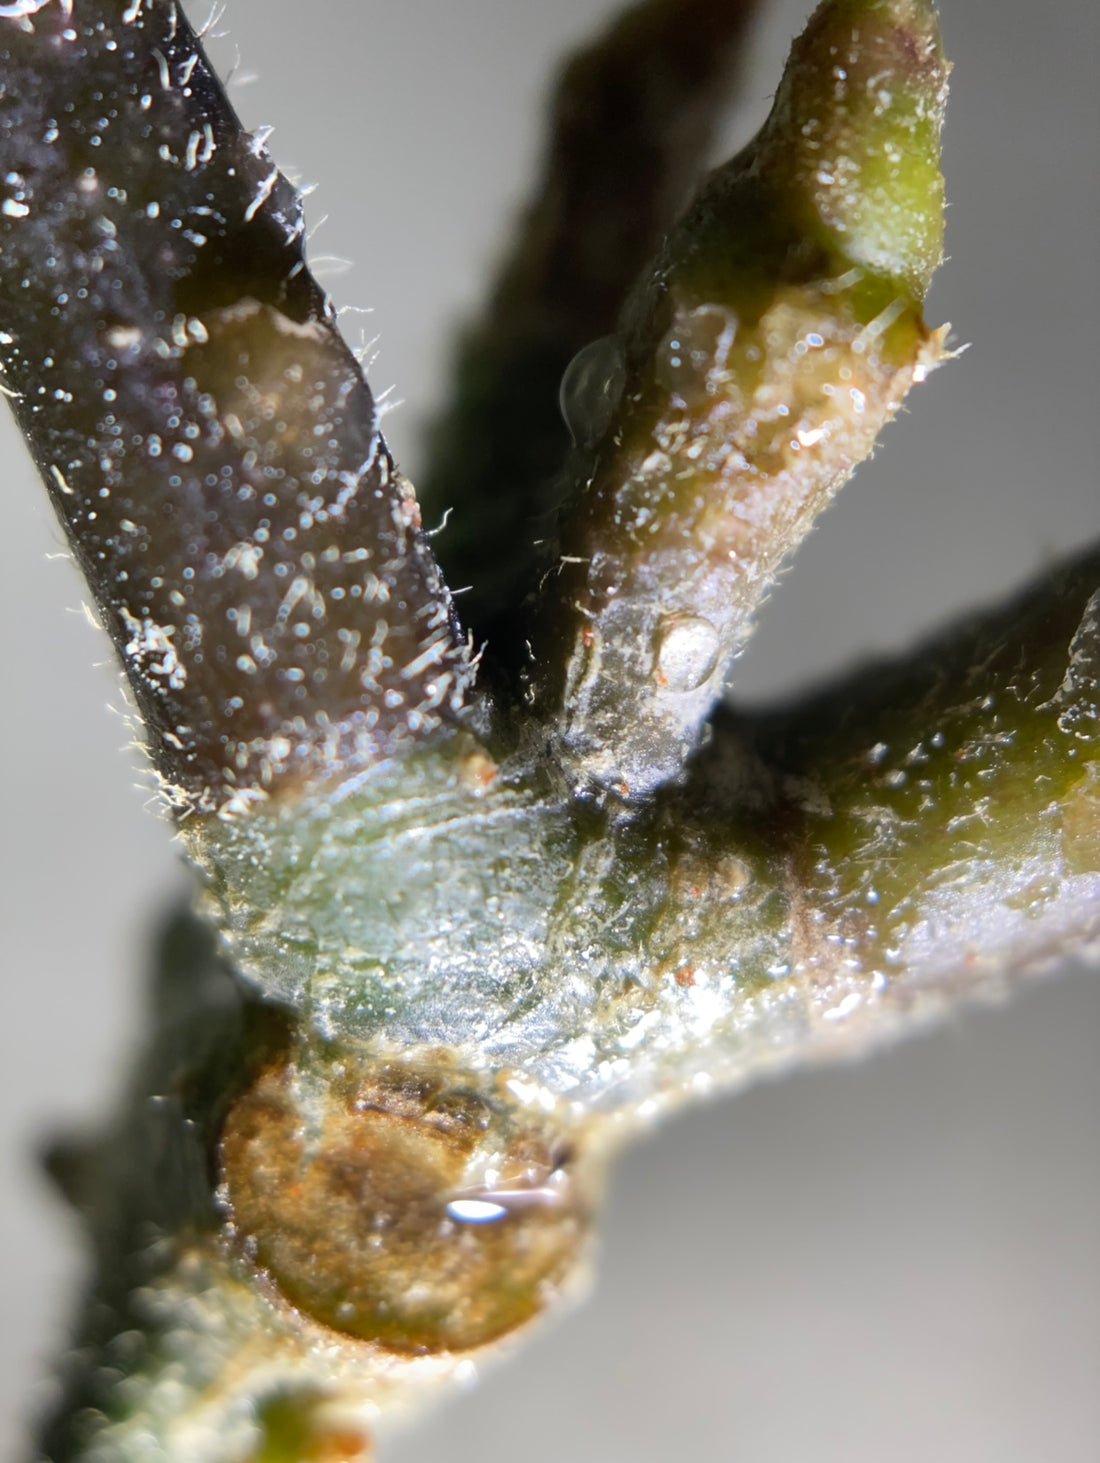 EPI 7: Let's Talk Hoya Pests.. the Good, the Bad and the Ugly